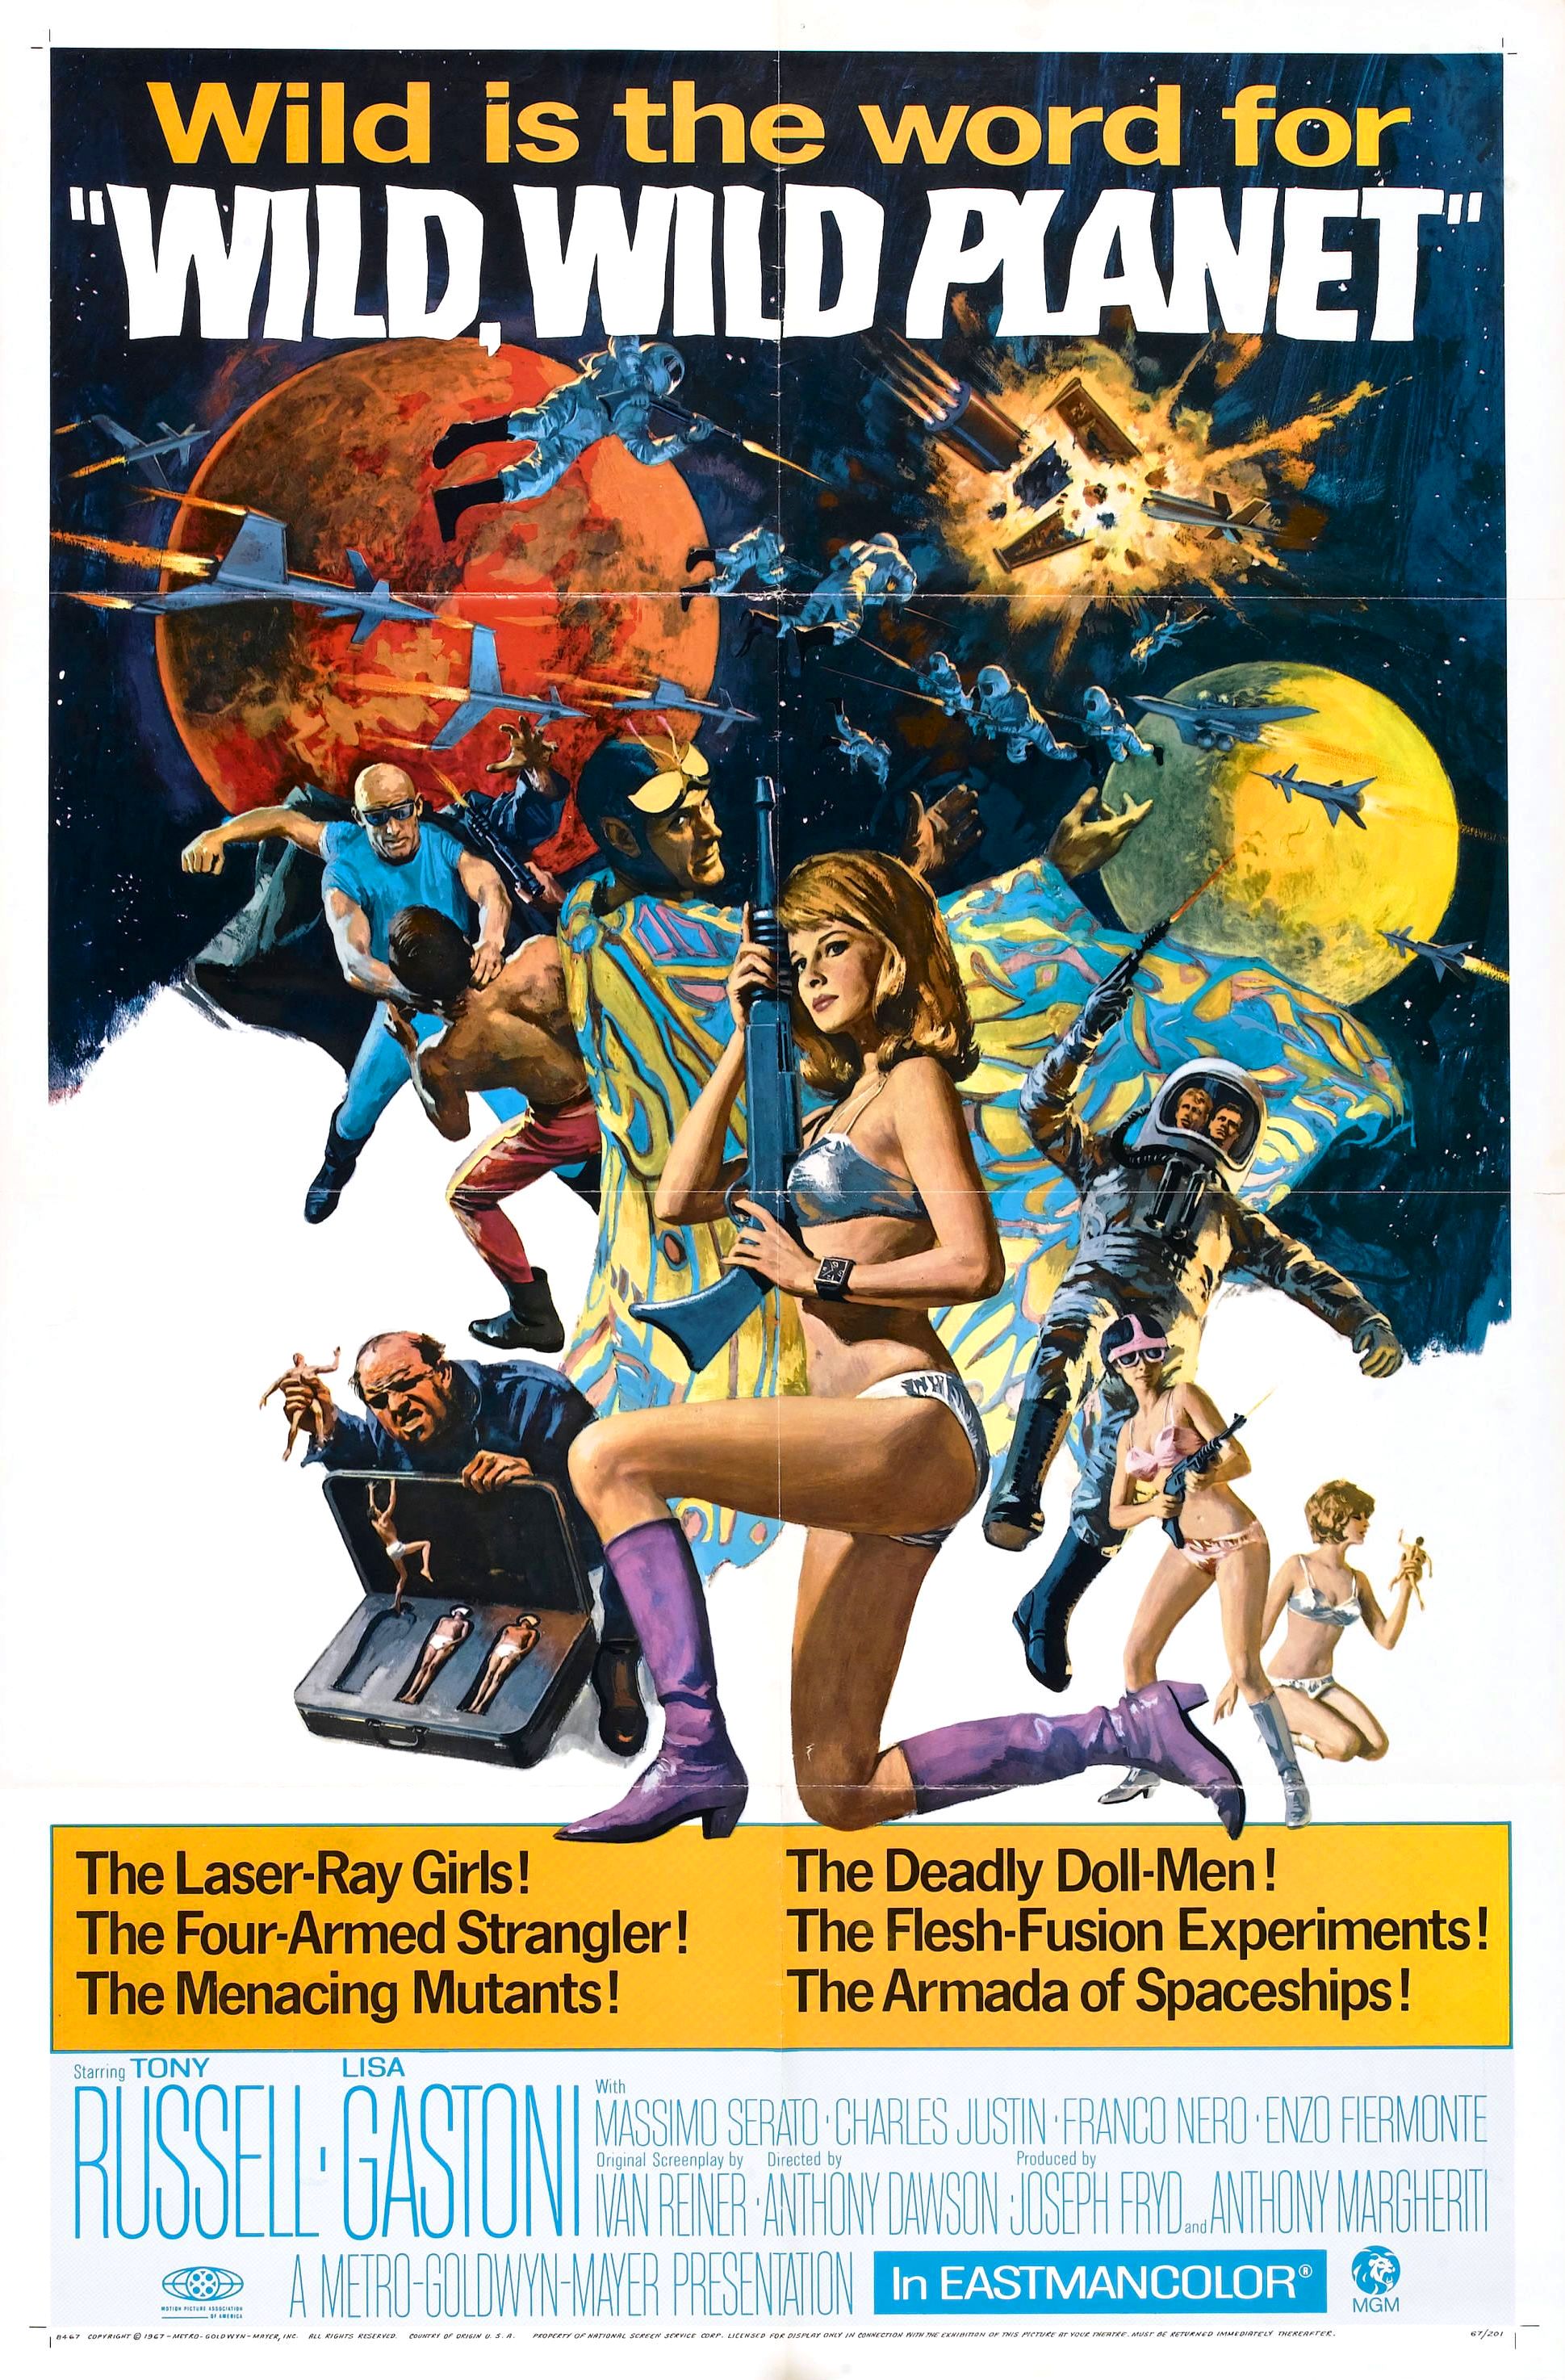 wild wild planet - Wild is the word for "Wild Wild Planet" Russell Gastonis The LaserRay Girls! The Deadly DollMen! The FourArmed Strangler! The FleshFusion Experiments! The Menacing Mutants! The Armada of Spaceships! Ssmiserad Chalislosin Roetinero Imita